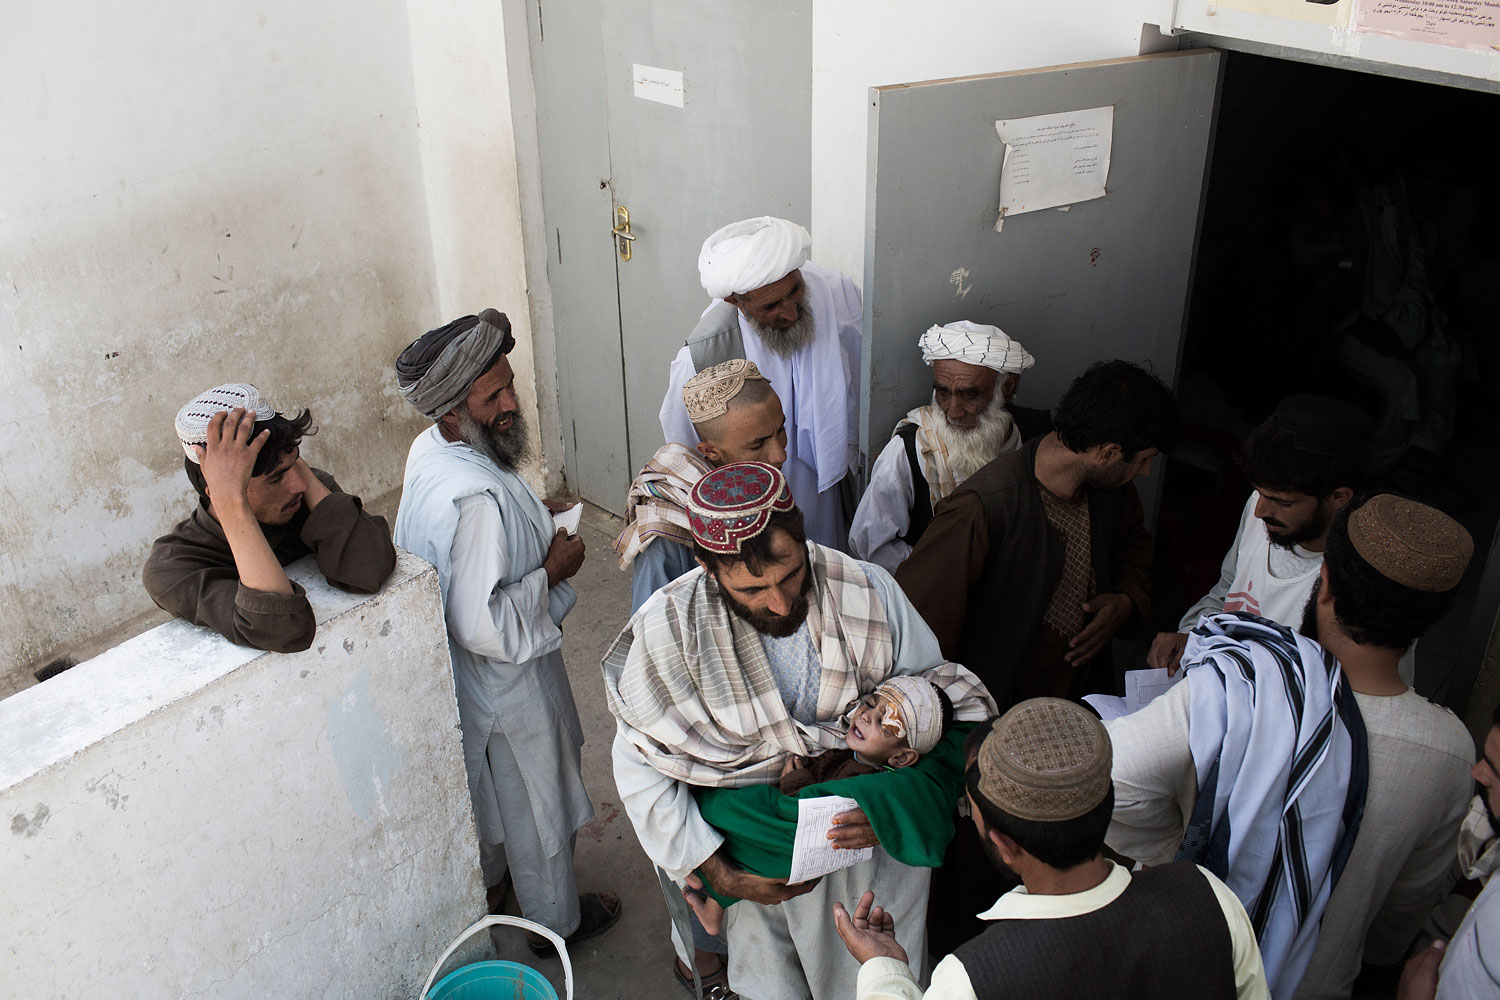 Patients and visitors gather at the door of OPD at Boost Hospital in Lashkar Gah, Helmand province, Southern Afghanistan. The provincial hospital, supported by MSF, is one of only two functioning referral hospitals in southern Afghanistan. Helmand is one of the most conflict-affected provinces in the country.